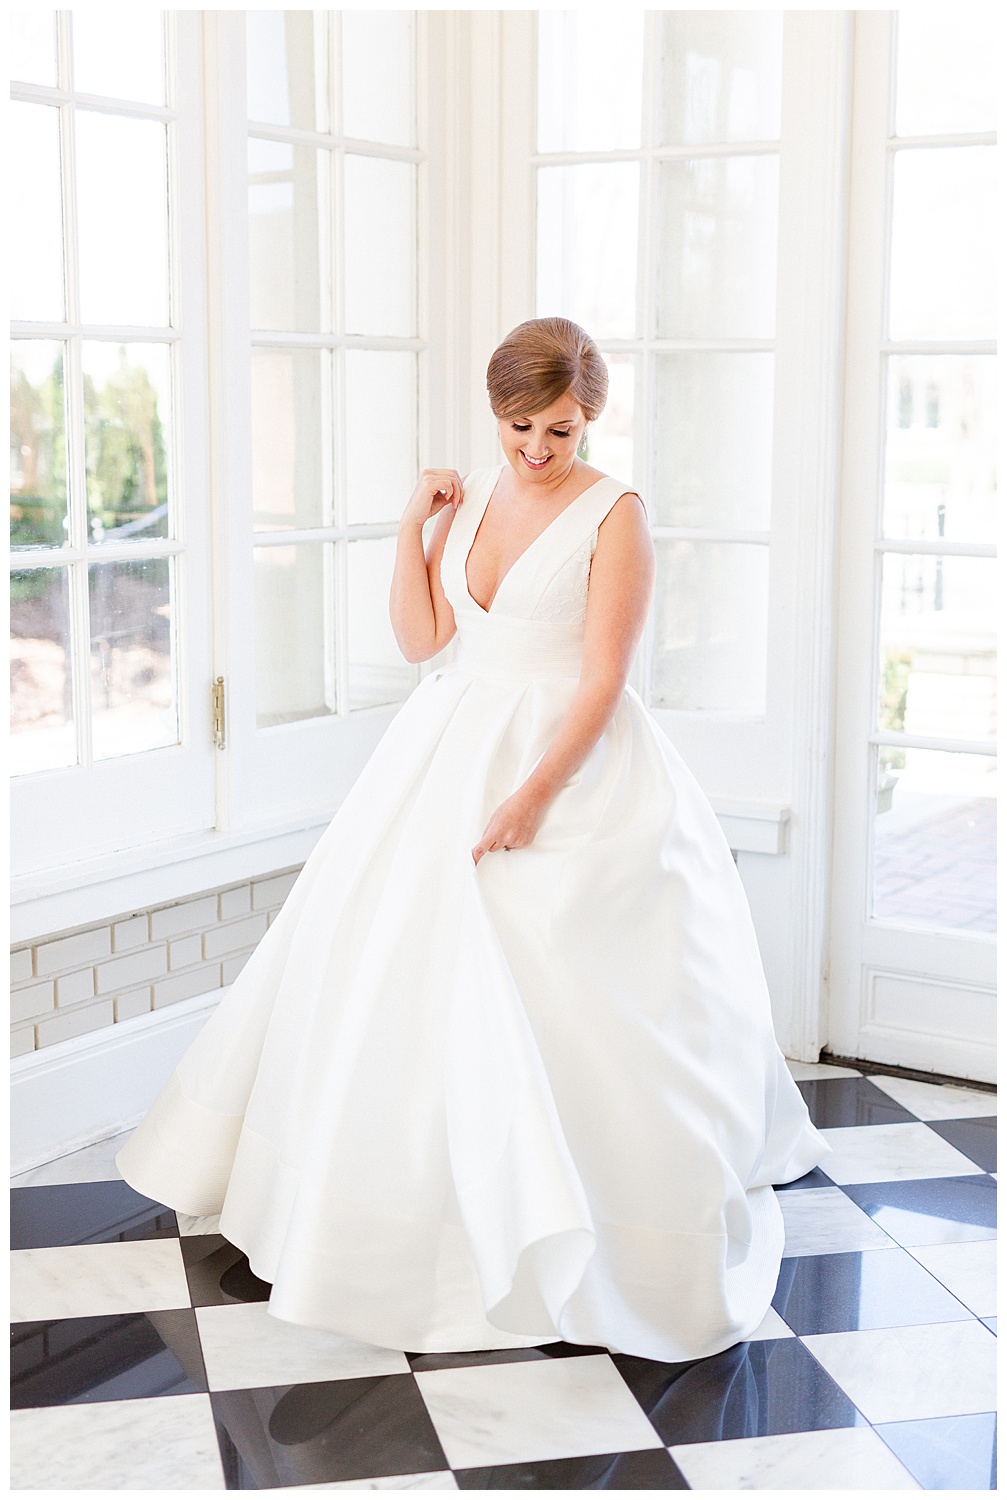 Light and airy bridal portraits